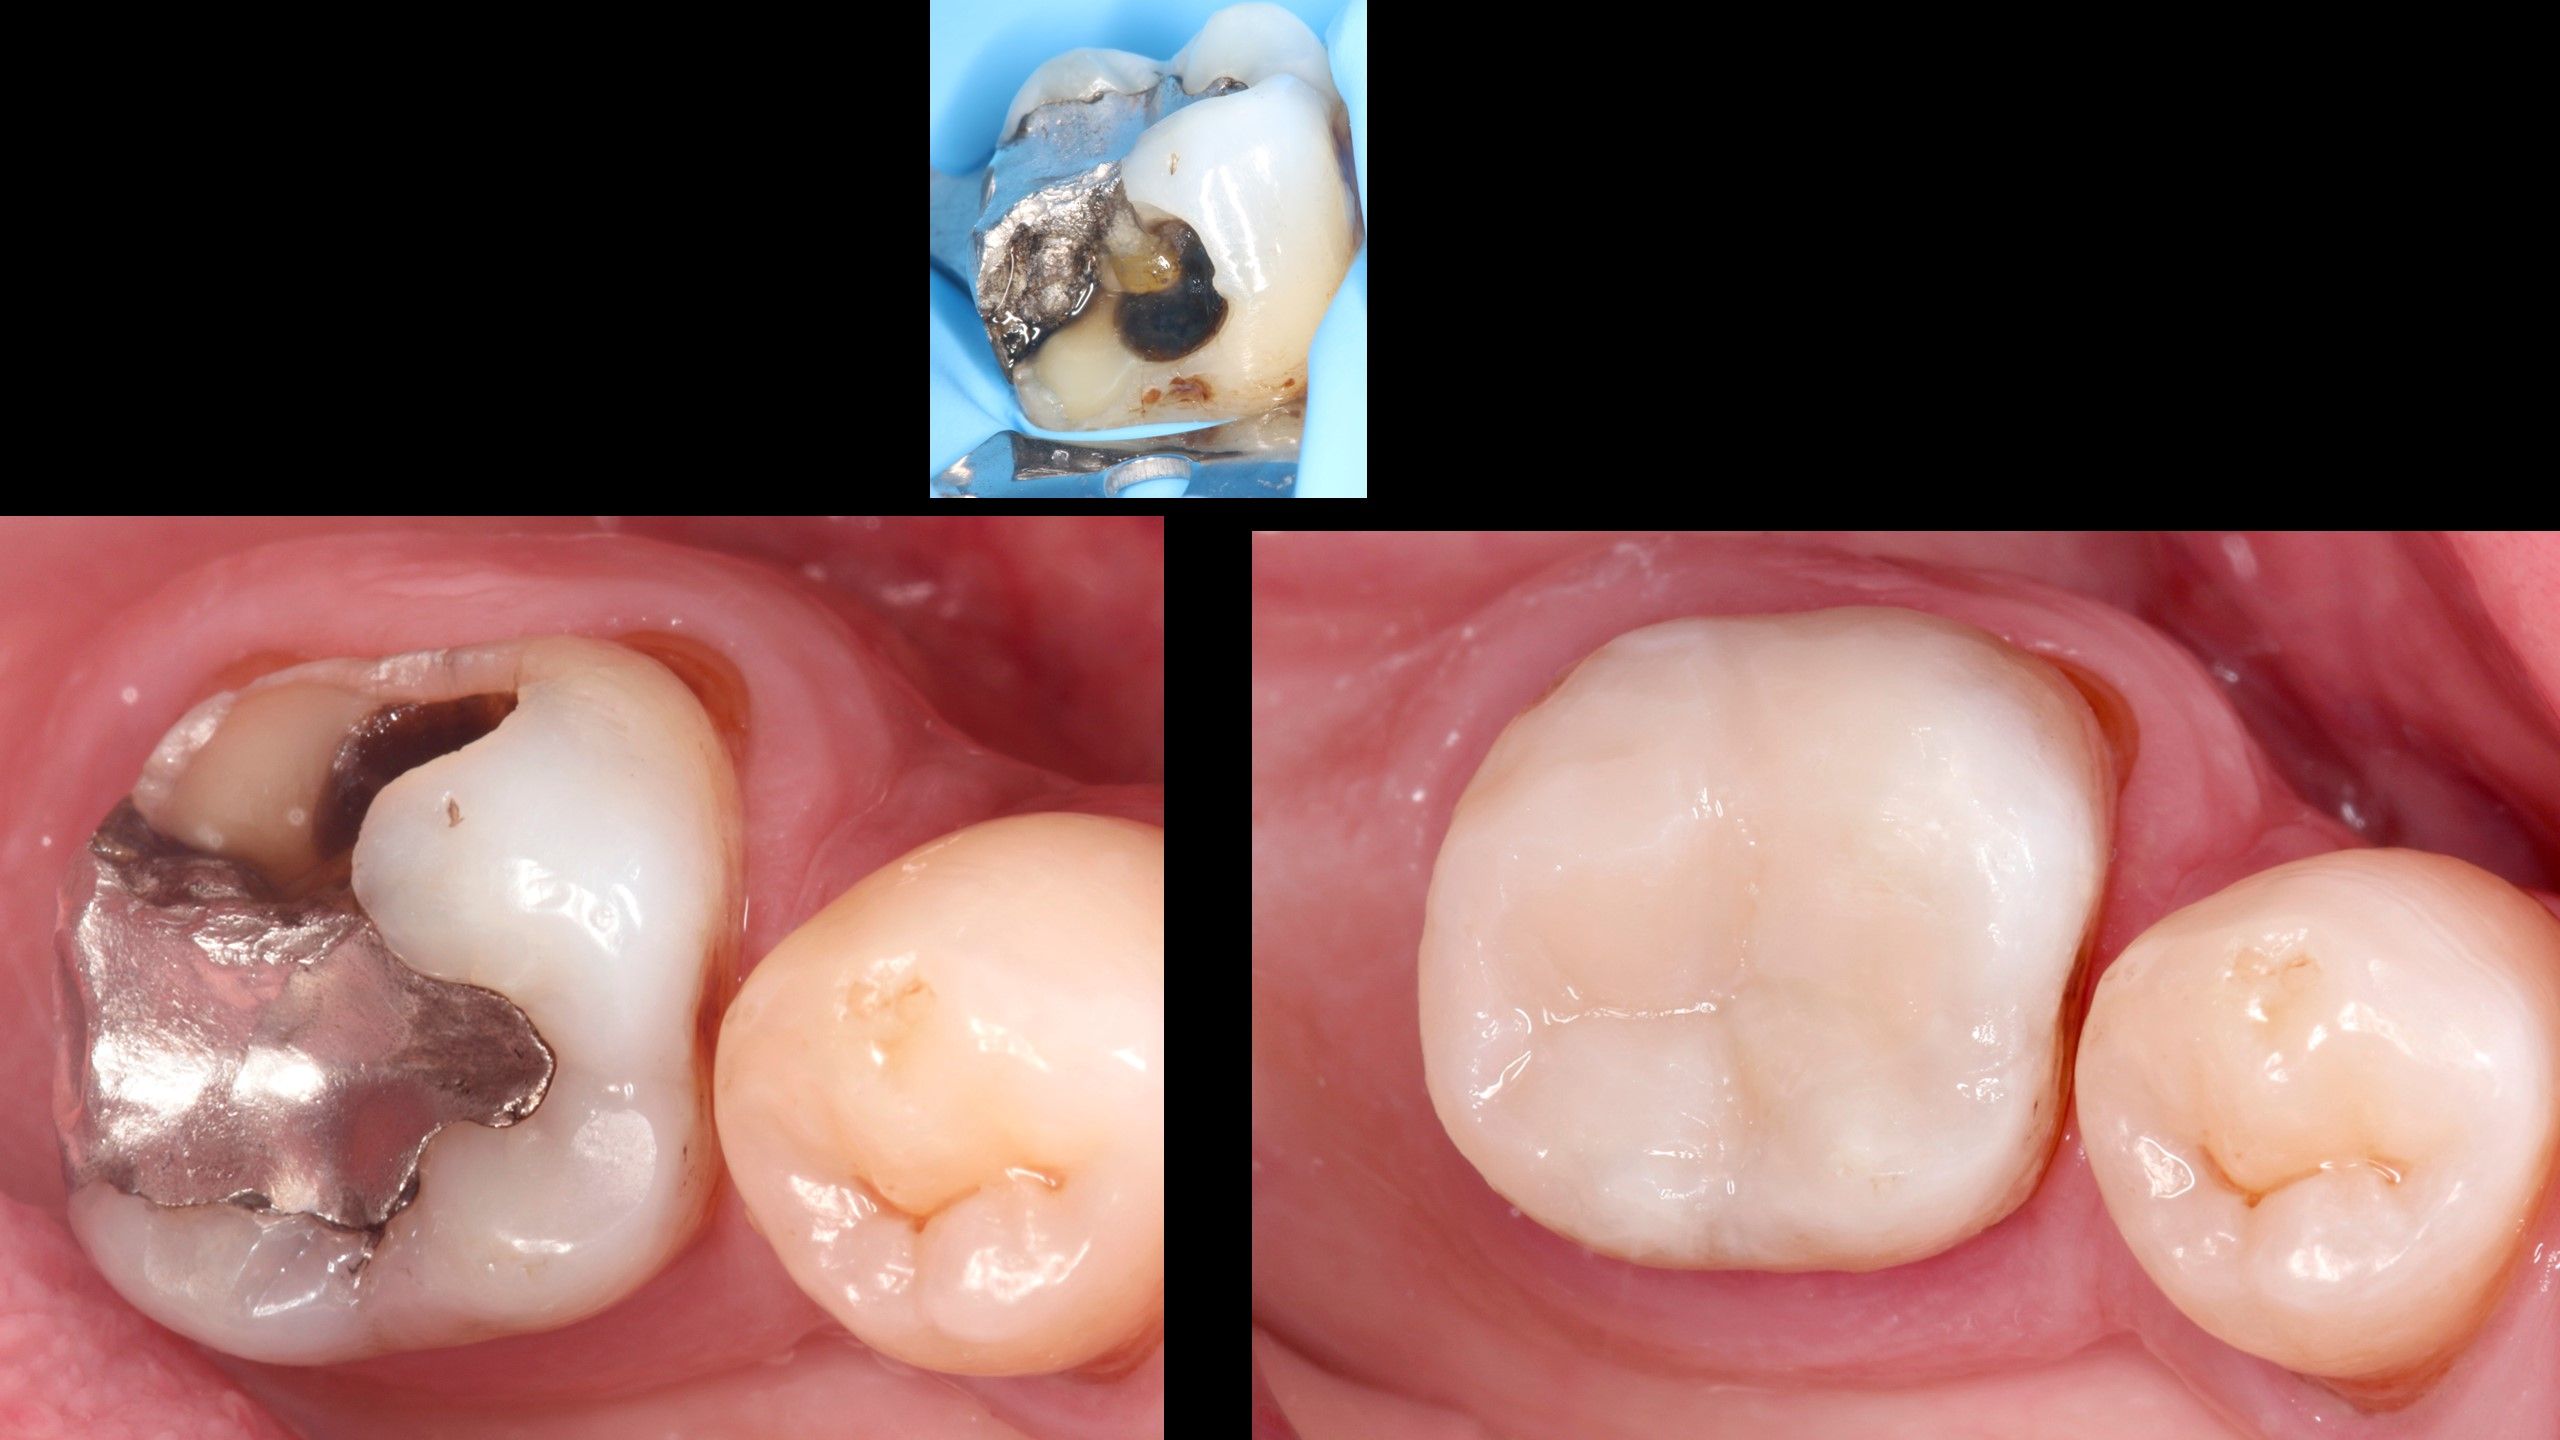 Amalgam removal treatment, old metal fillings in Padrós dental clinic. Your dentist in Barcelona